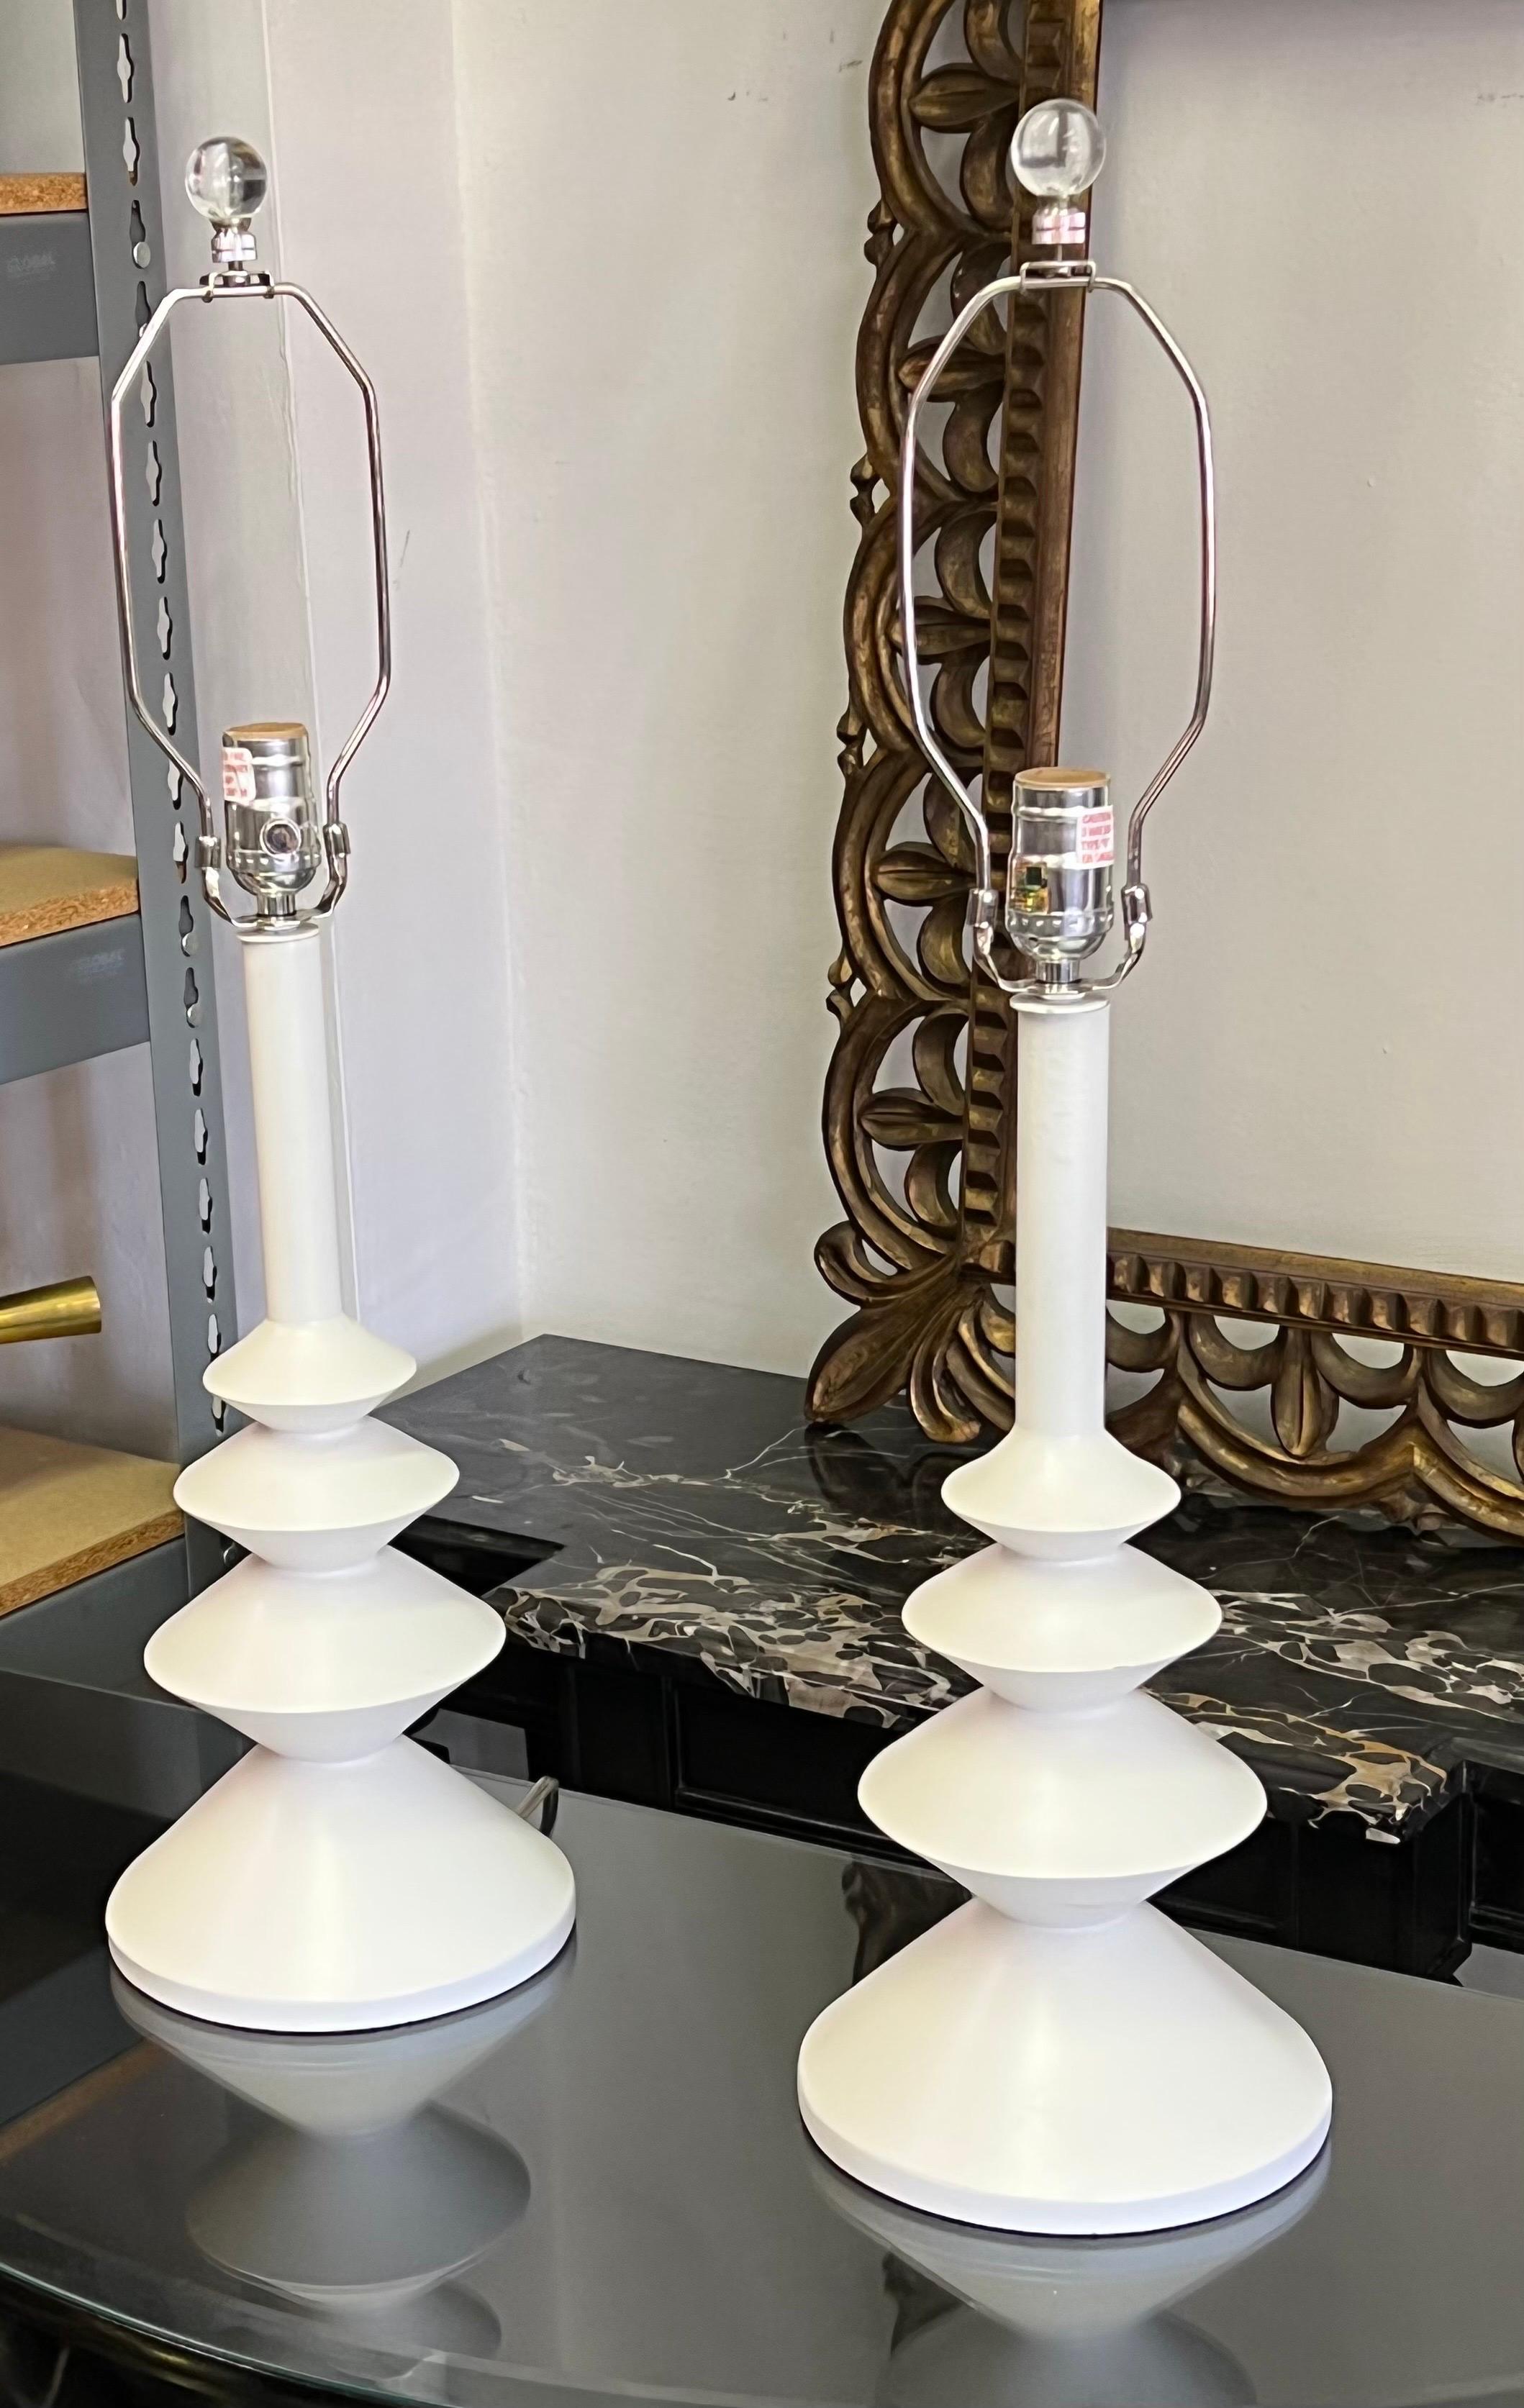 Elegant Pair of French style table lamps in the style of Alberto and Diego Giacometti, and Attributed to Sirmos. The pieces have a timeless columnar, cylindrical organic form that has an enchanting sensibility. 

Priced and Sold as a pair. The